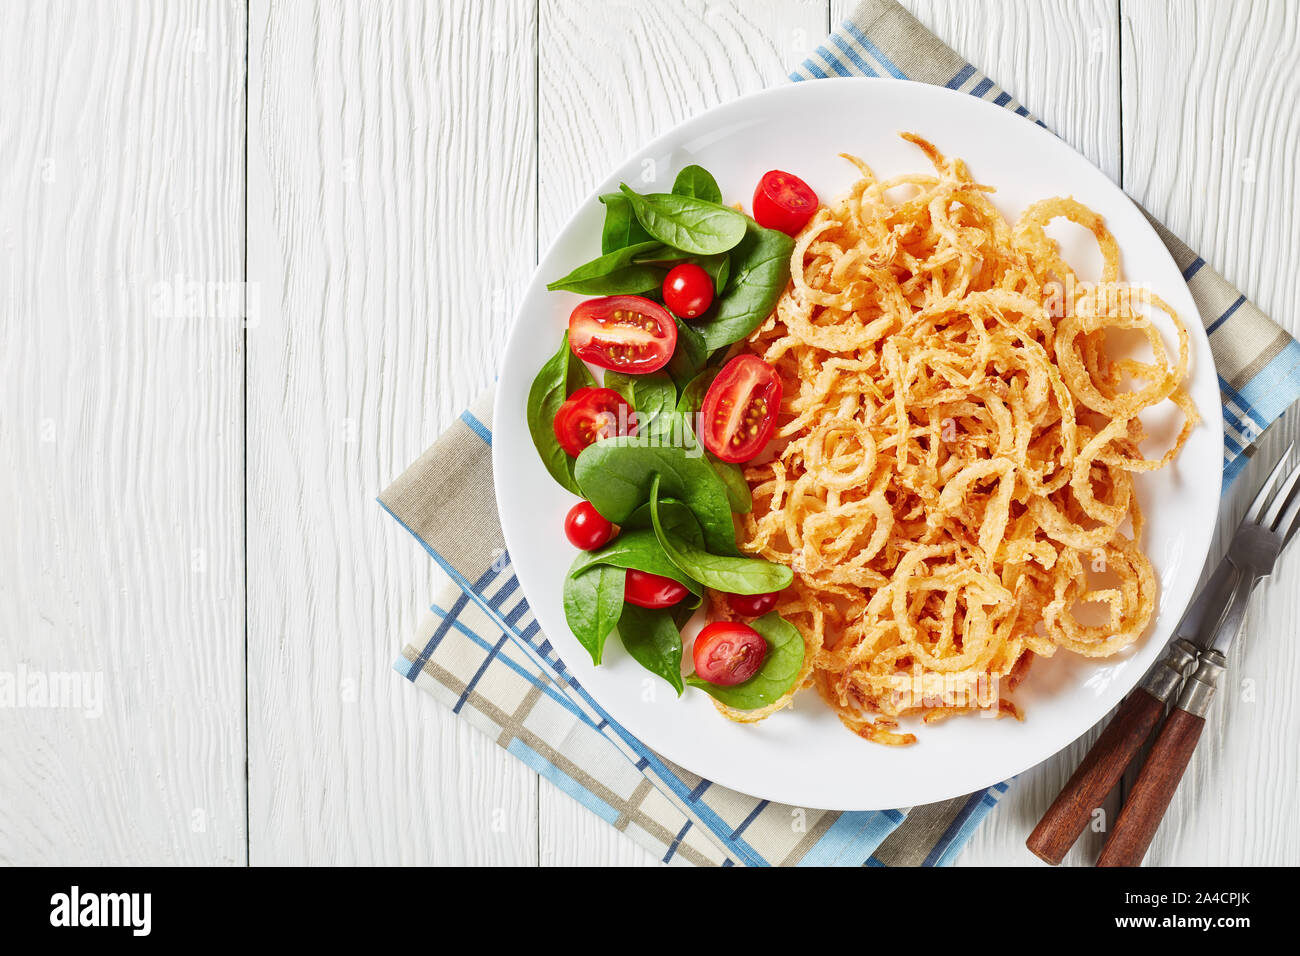 close-up of french crispy fried onion rings and strings with crunchy coating served with fresh spinach and tomato salad on a white plate on a wooden t Stock Photo